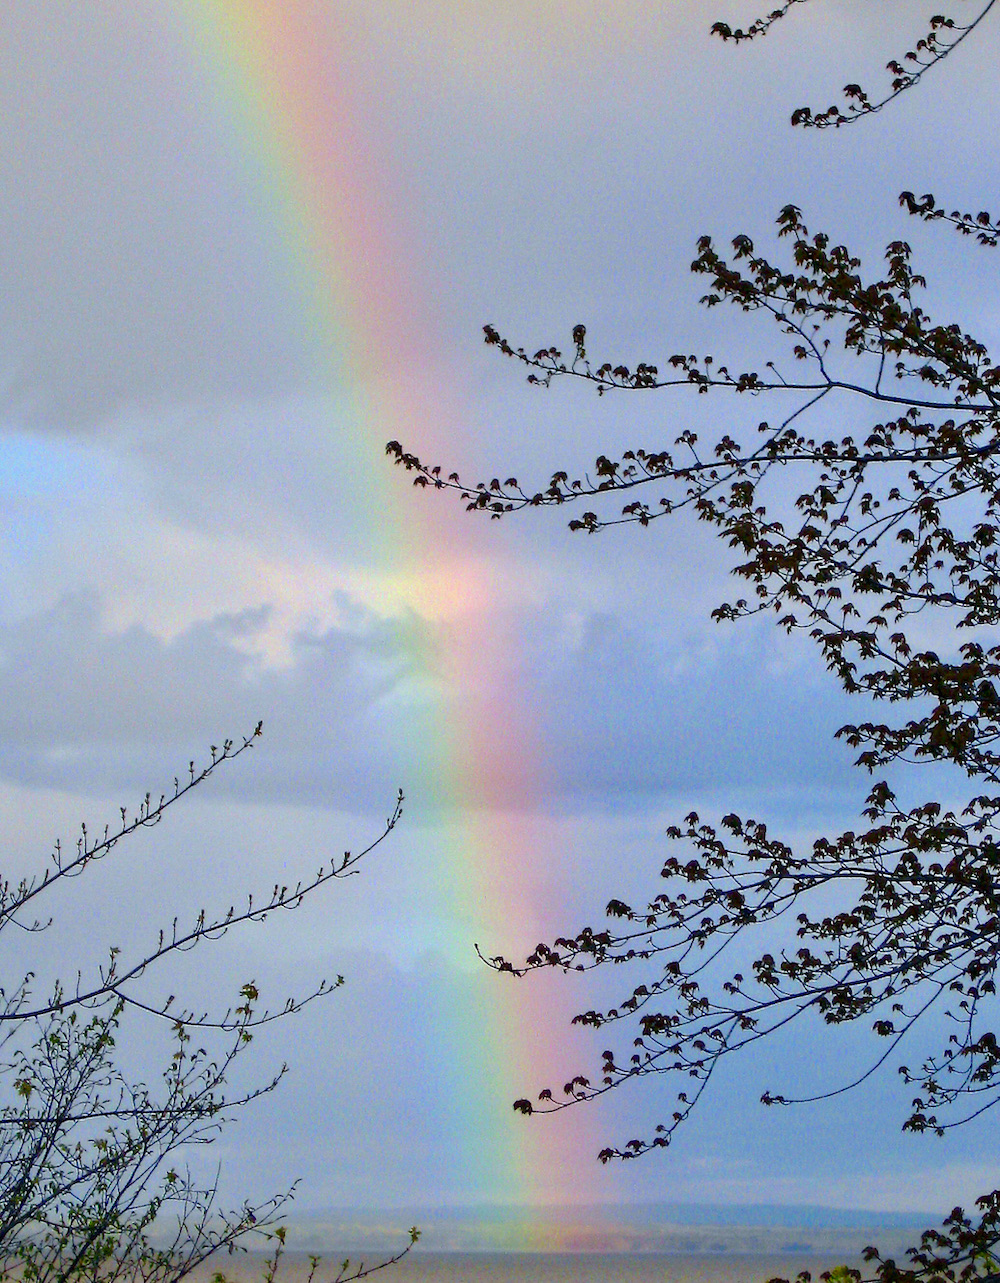 Half of a rainbow, stretching from sky to earth with foliage in the foreground